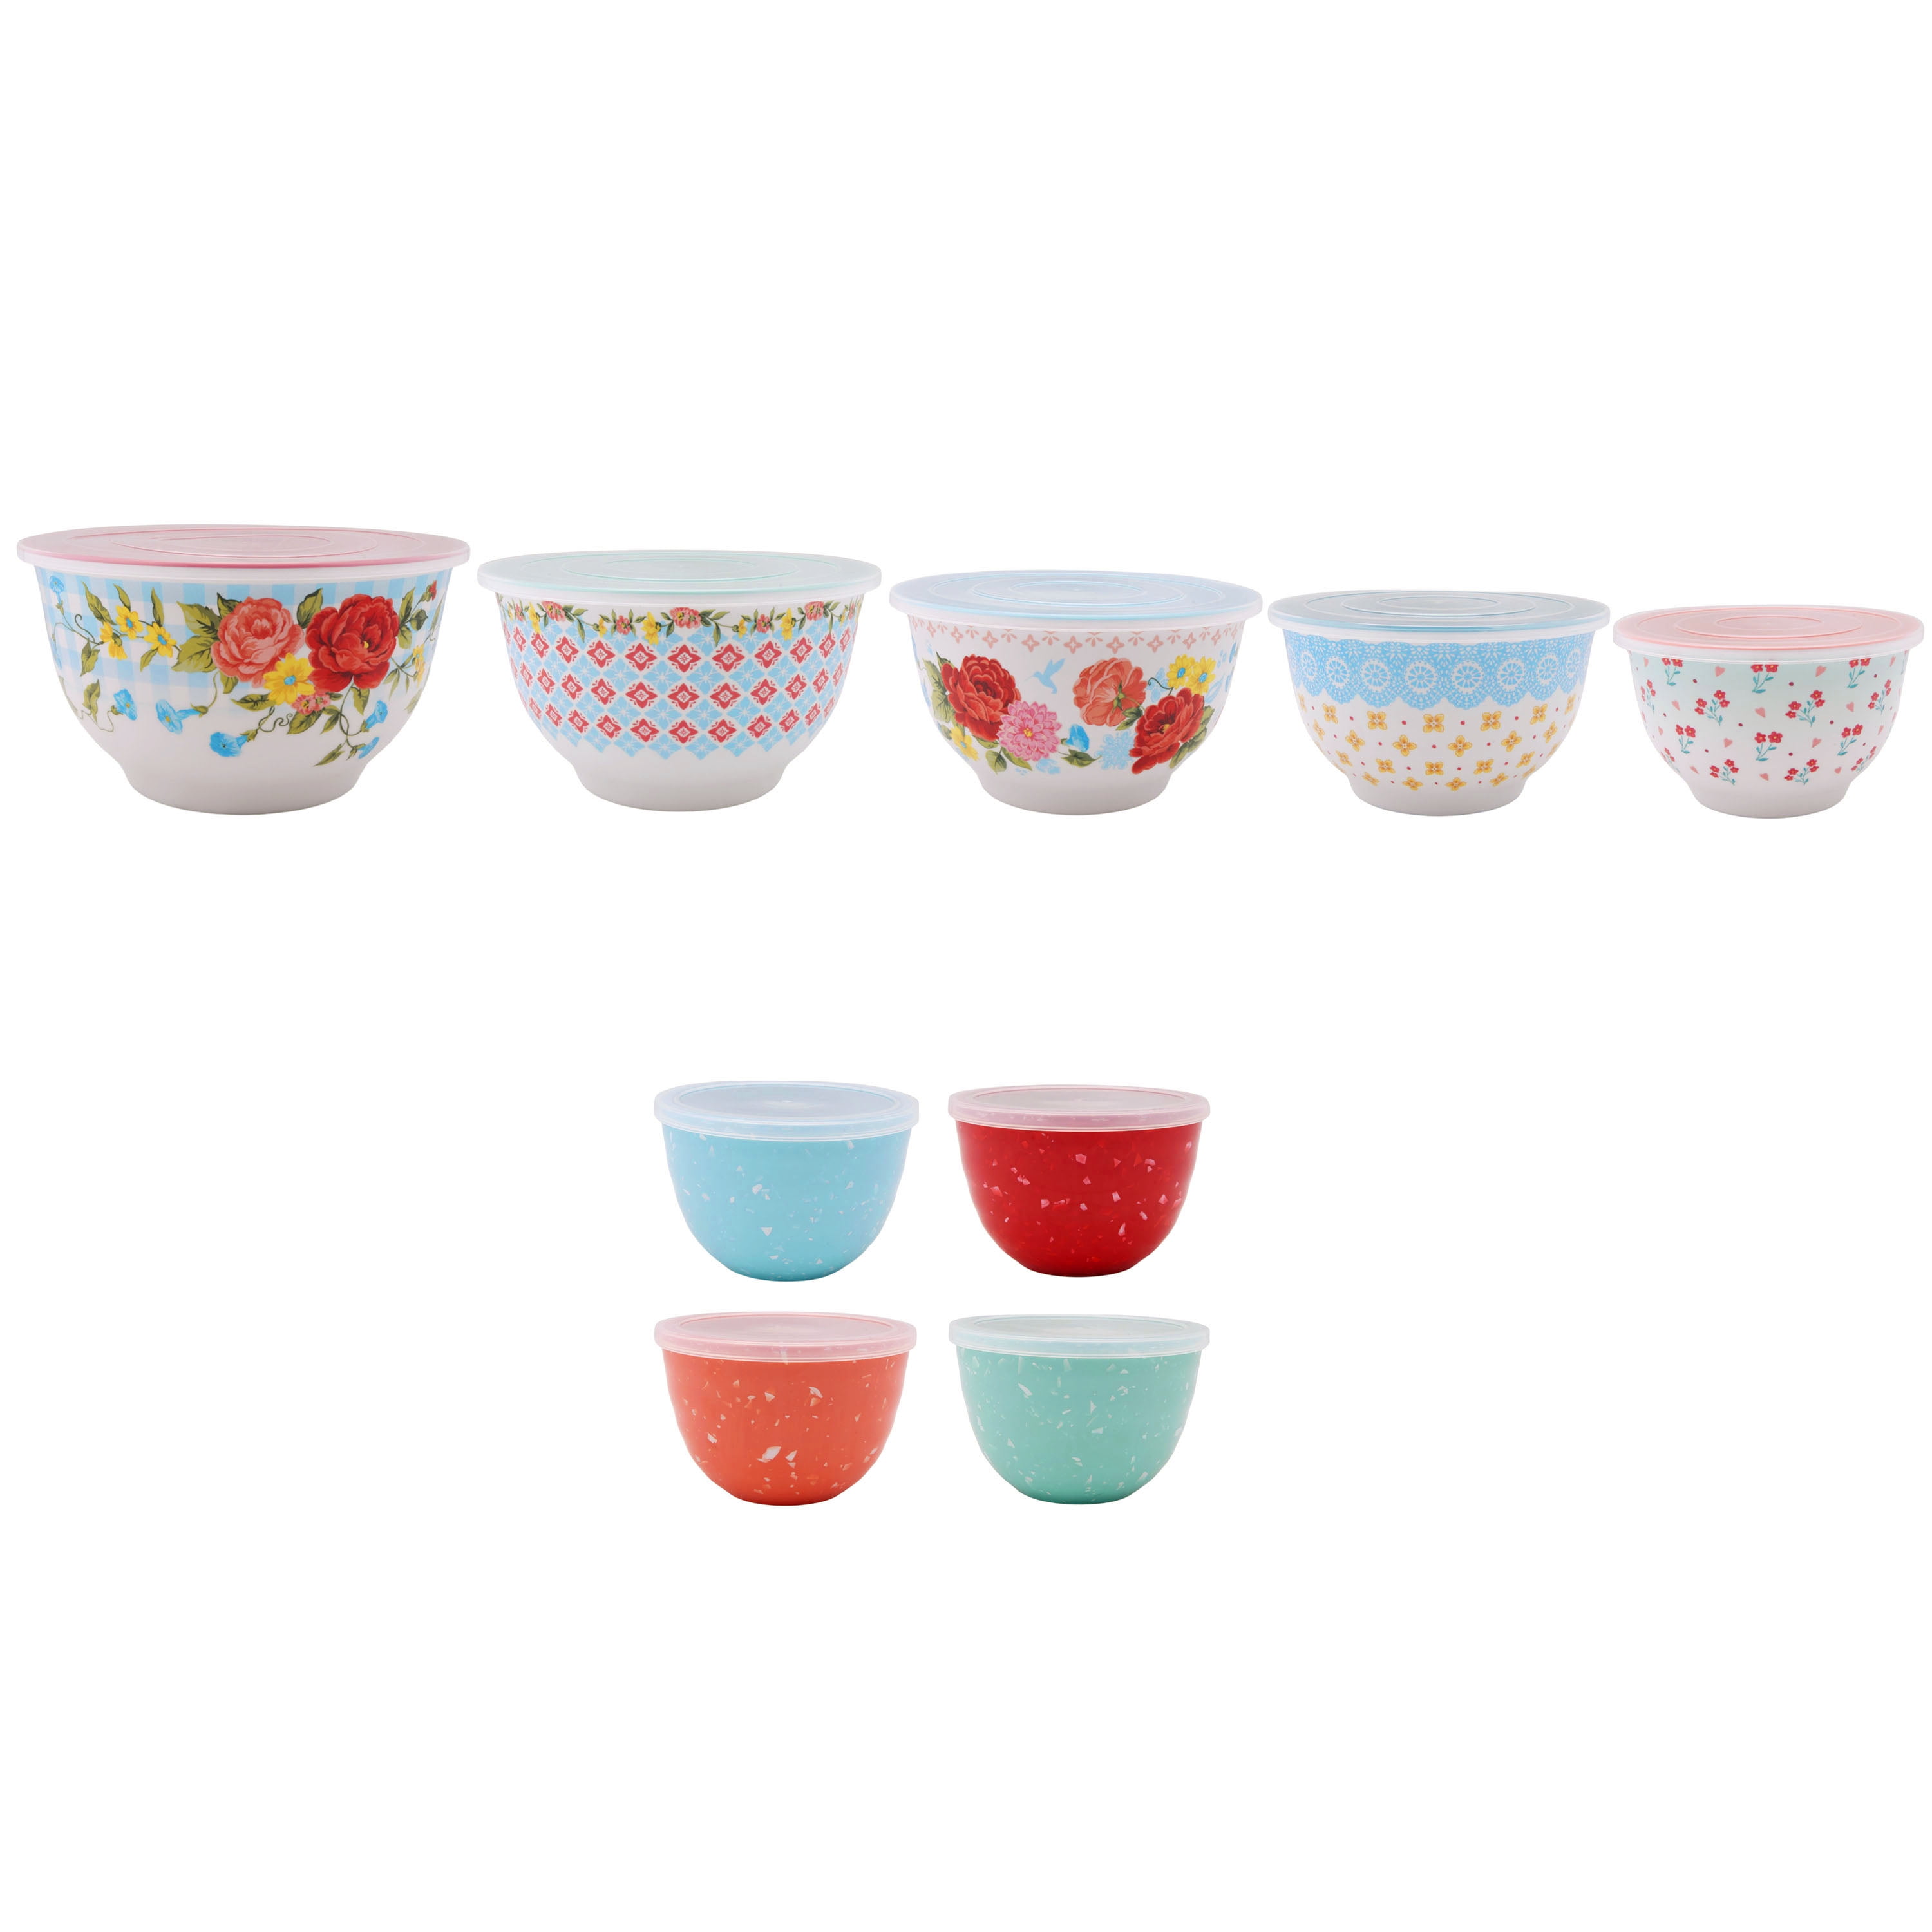 The Pioneer Woman Mixing Bowl Set with Lids, Sweet Romance, 18 Piece Set,  Melamine 